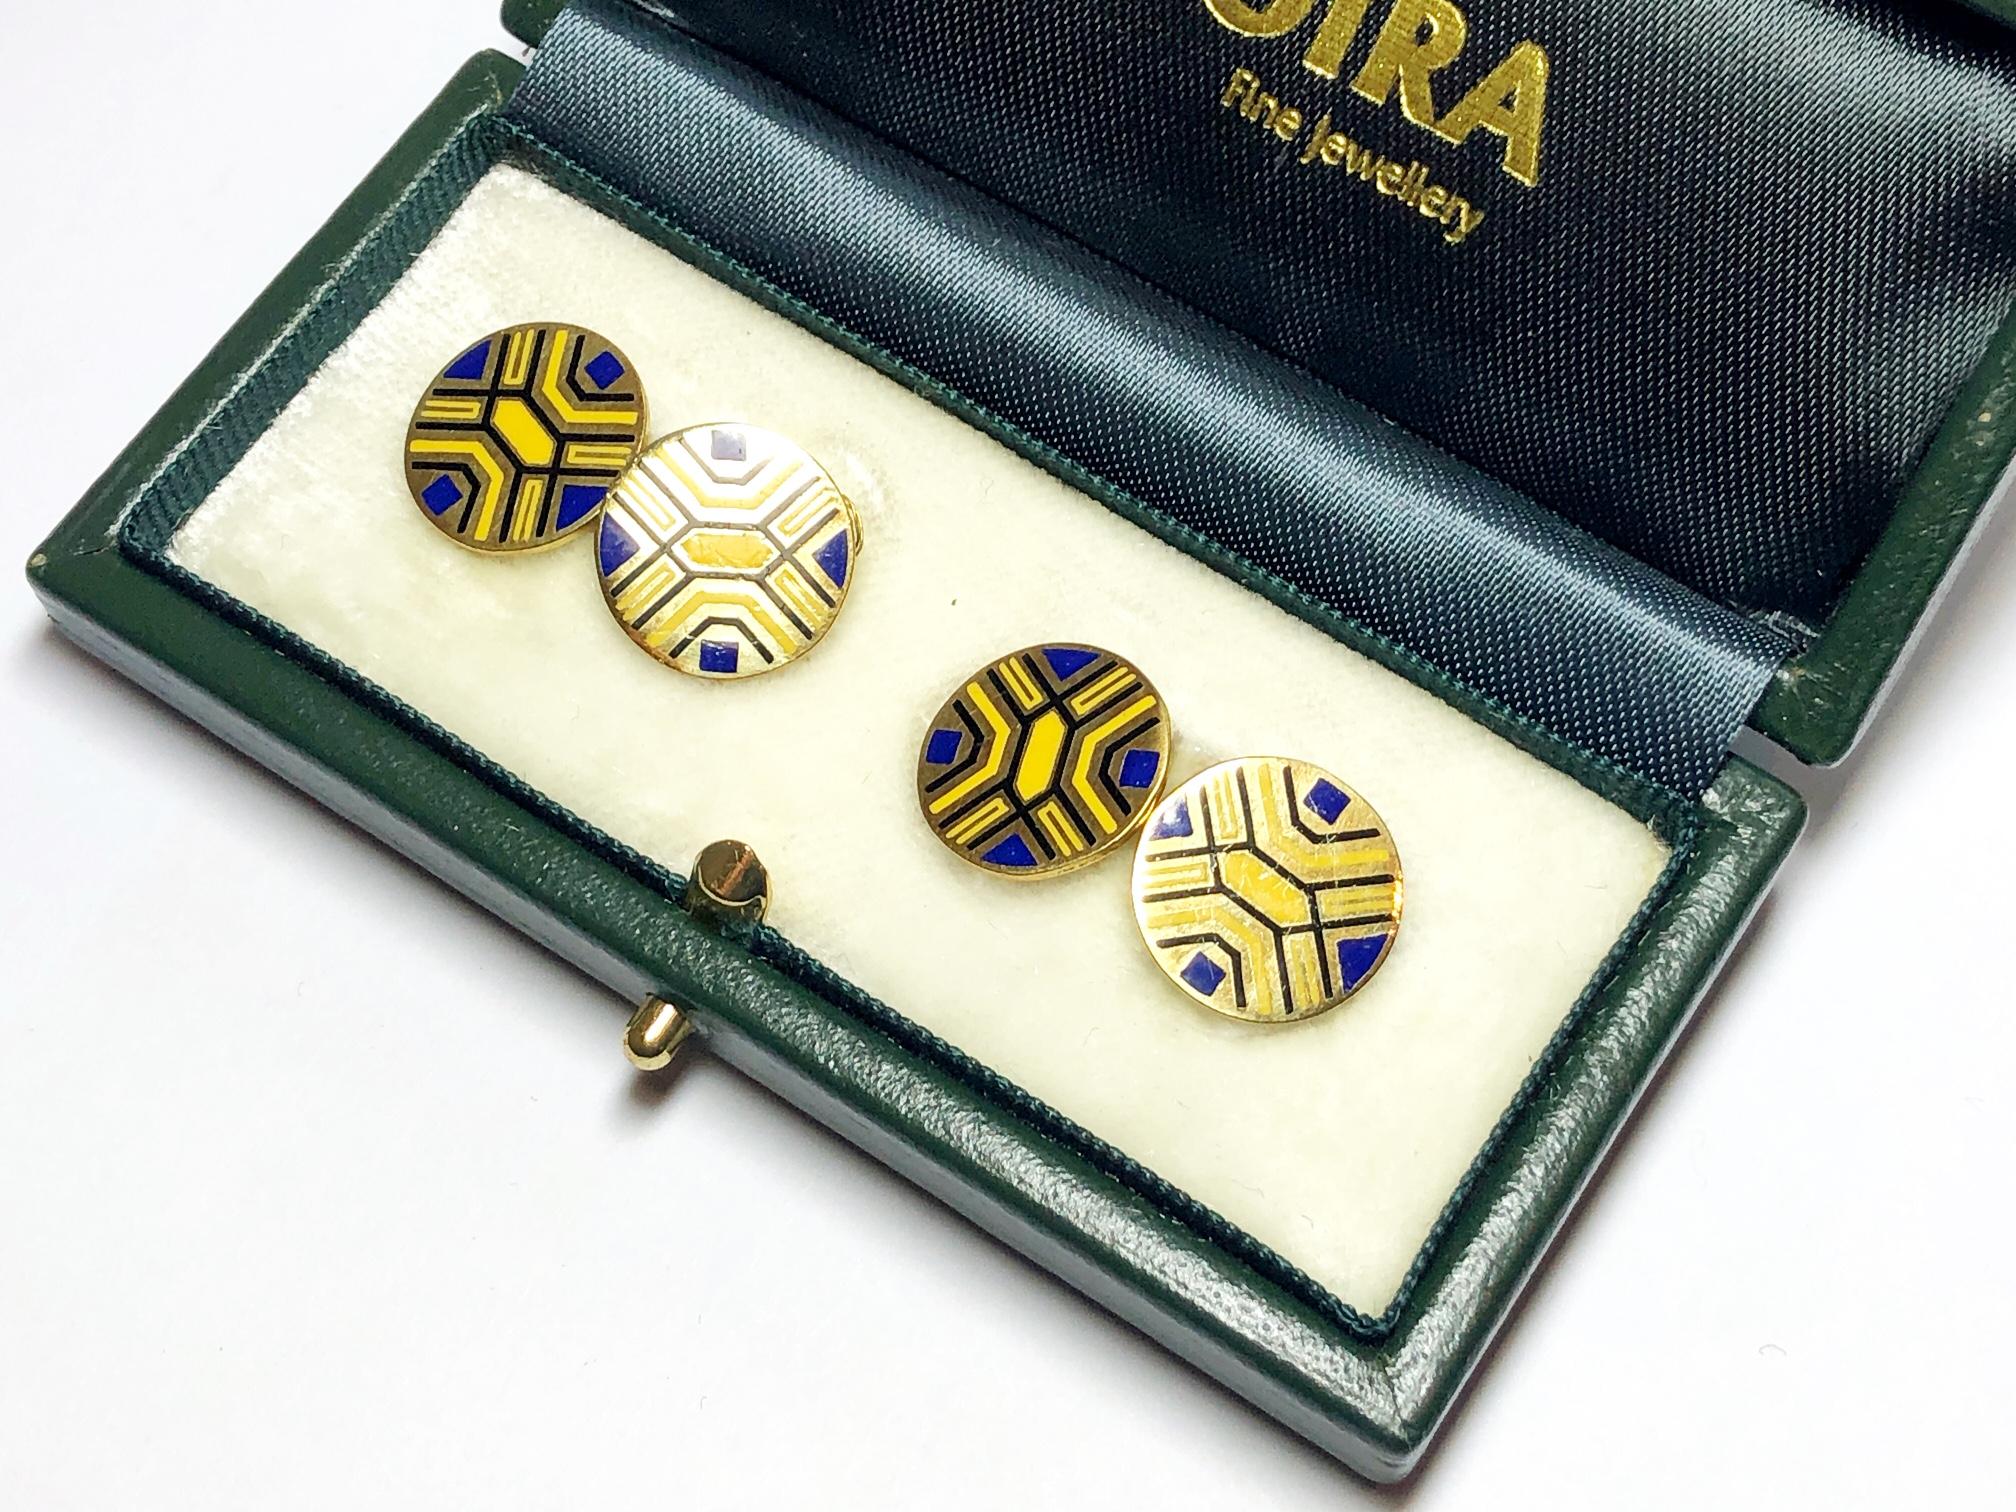 A pair of vintage enamel and gold cufflinks, circular in shape, with yellow and blue enamel in an abstract design, on 14ct yellow gold, with bar fittings, circa 1950.